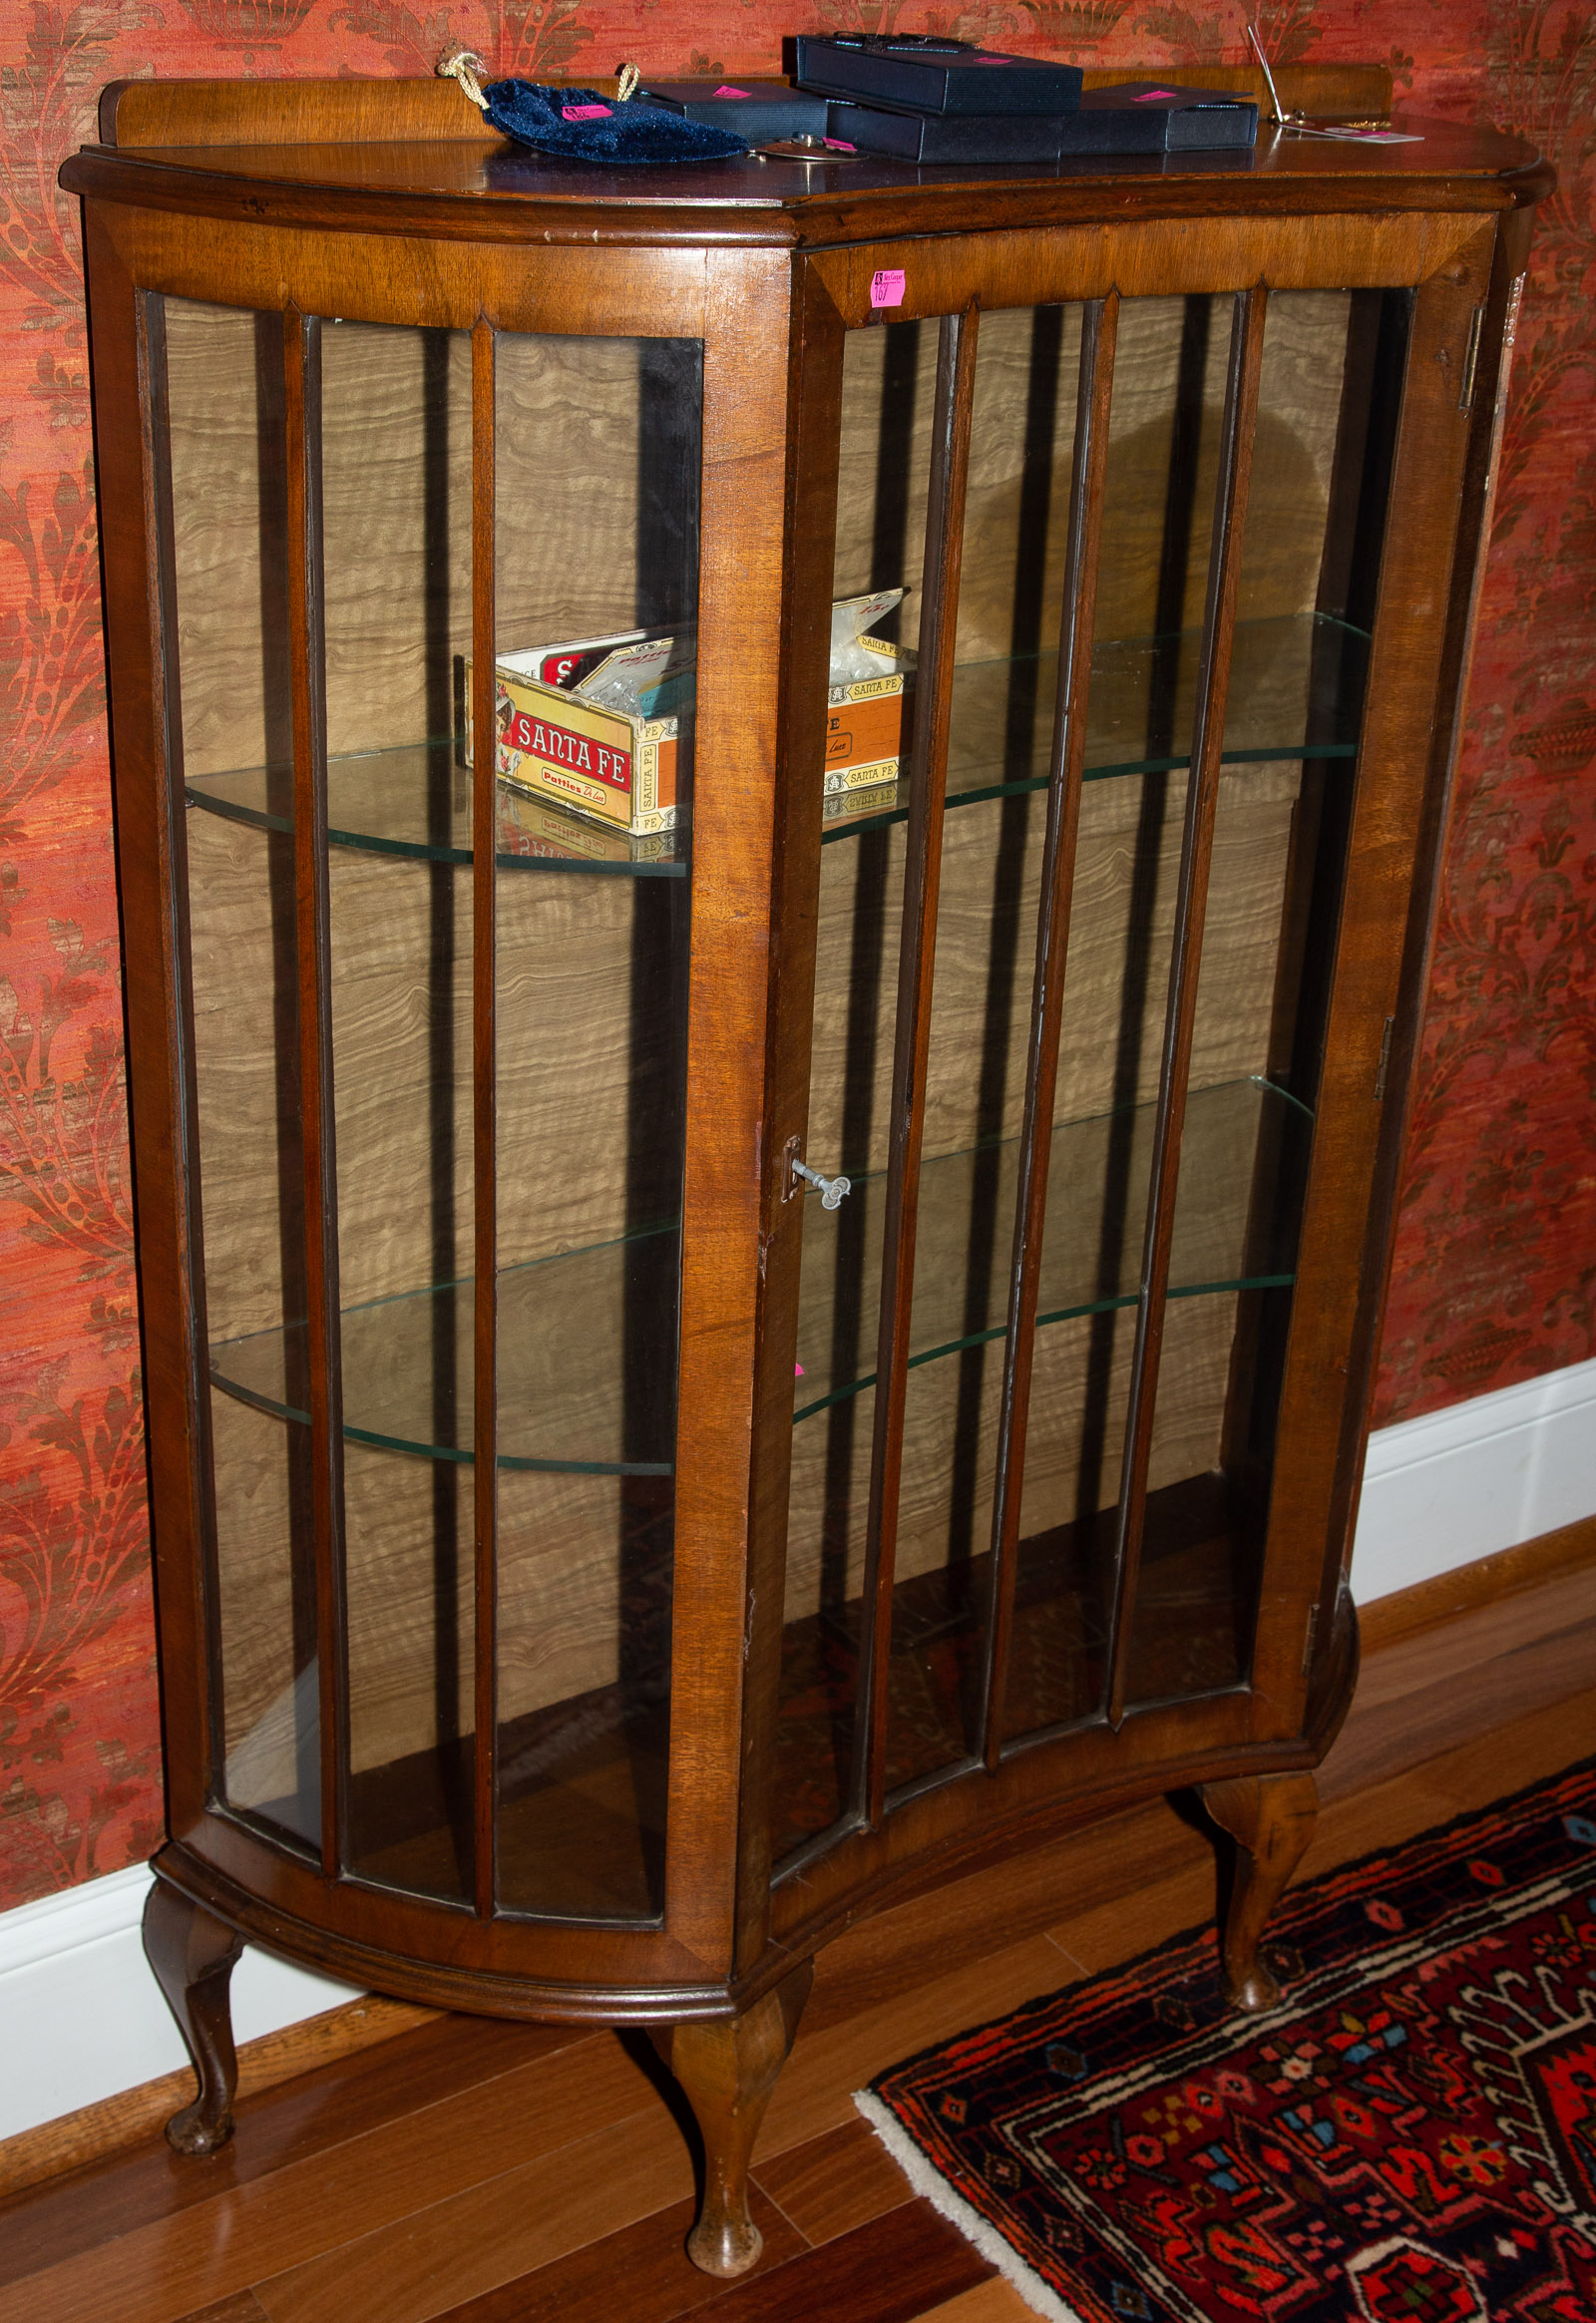 QUEEN ANNE STYLE CURIO CABINET